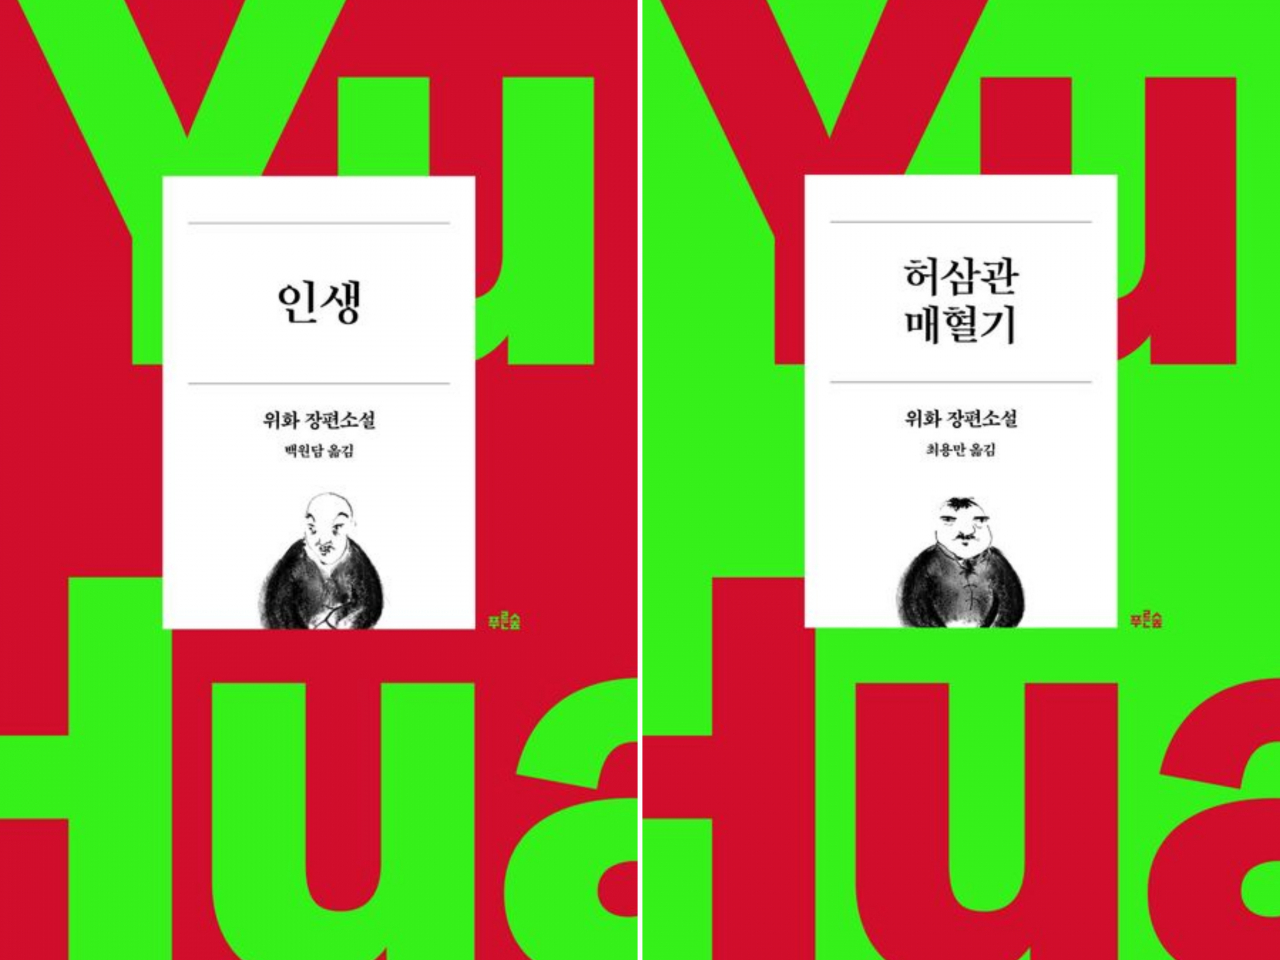 The Korean editions of "To Live" (left) and "Chronicle of a Blood Merchant" by Yu Hua (Prunsoop Publishing Co.)